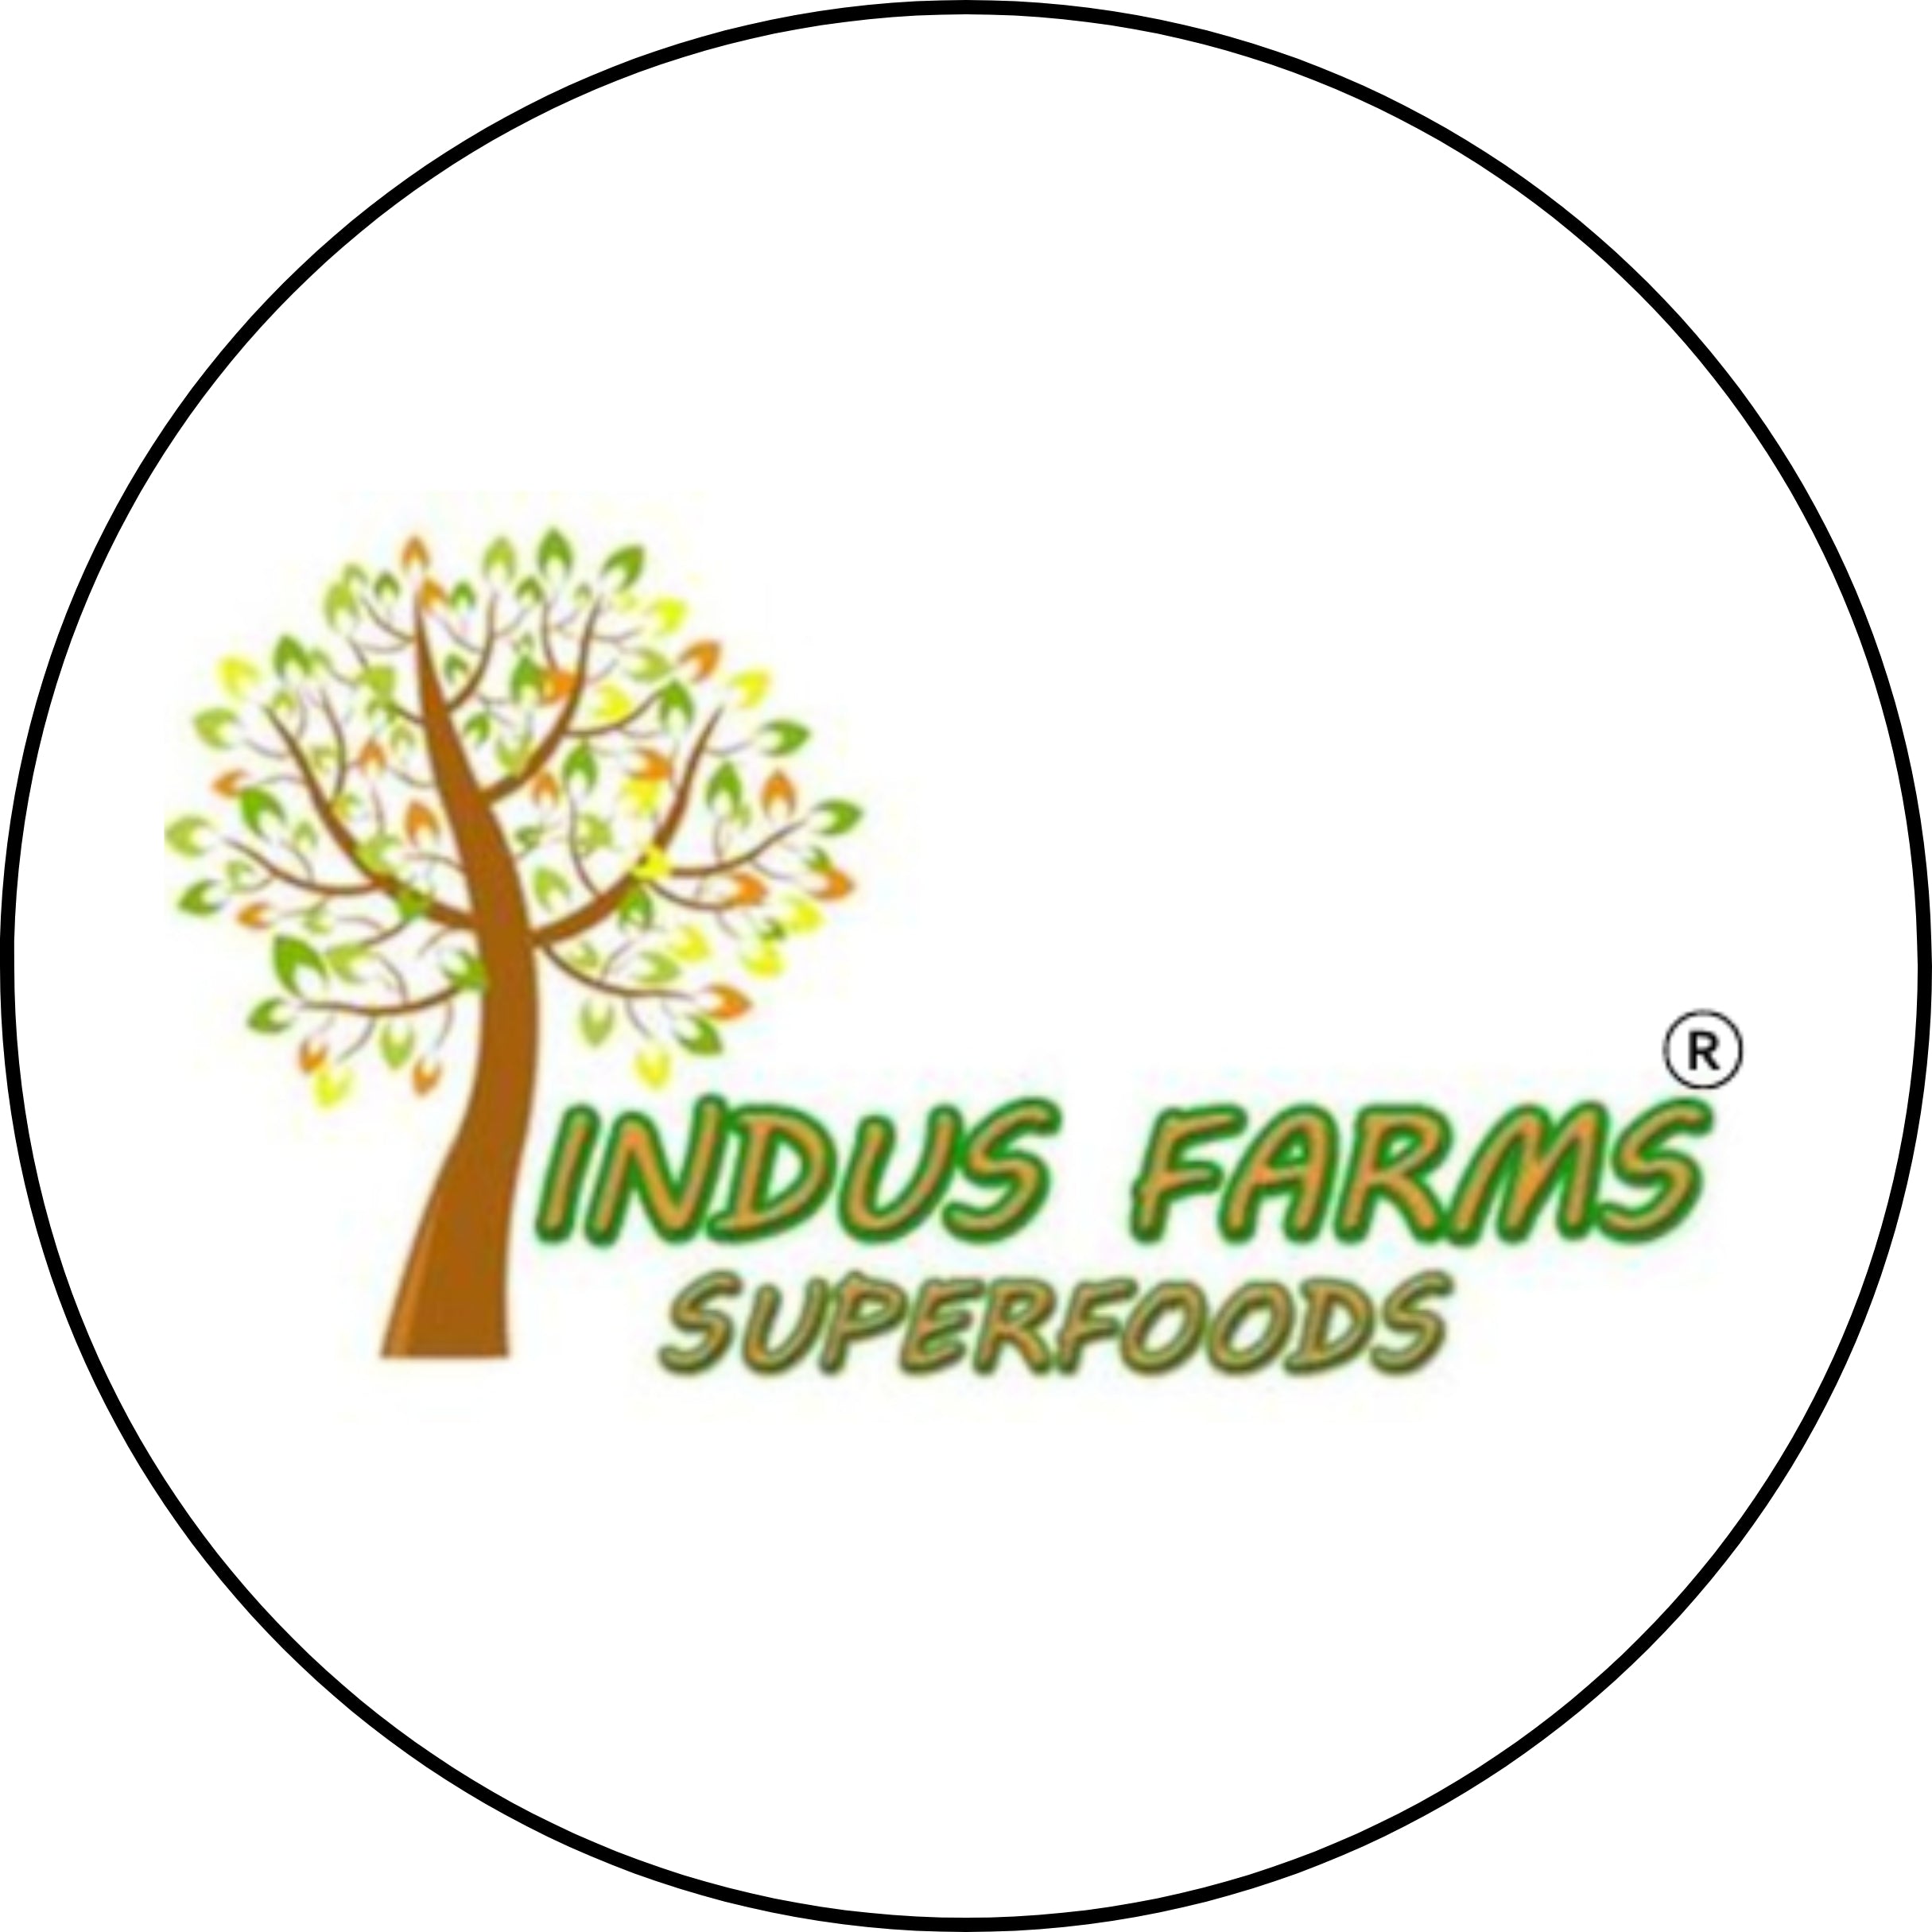 Indus Farms Superfoods